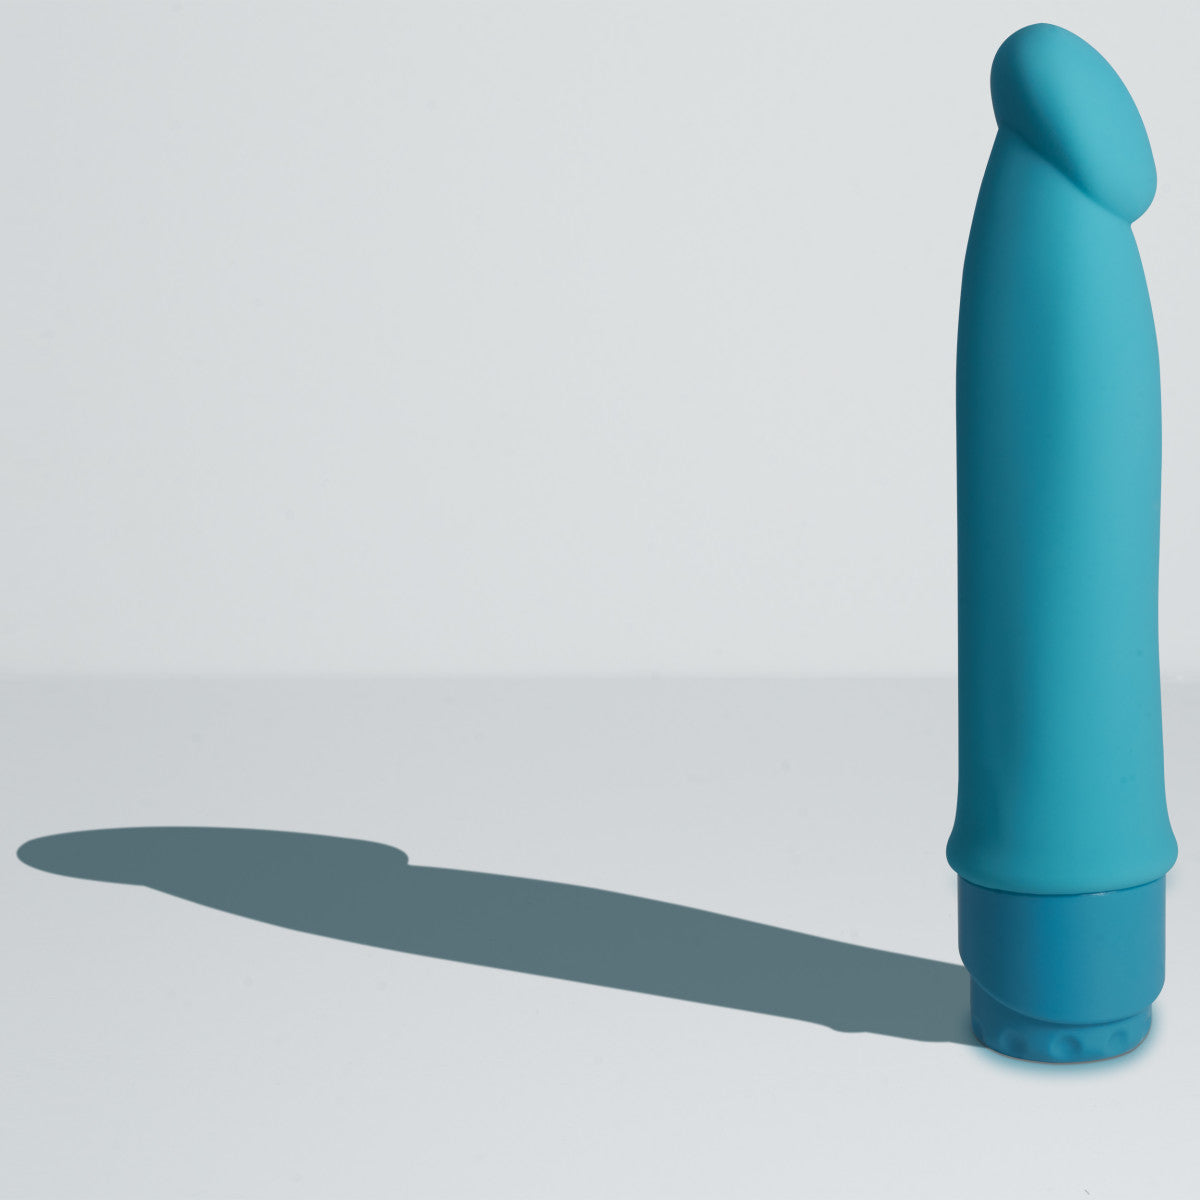 Blue vibrating dildo. Semi realistic shape with defined head and smooth straight shaft. Twist dial on bottom to control intensity. Additional images show alternate angles.